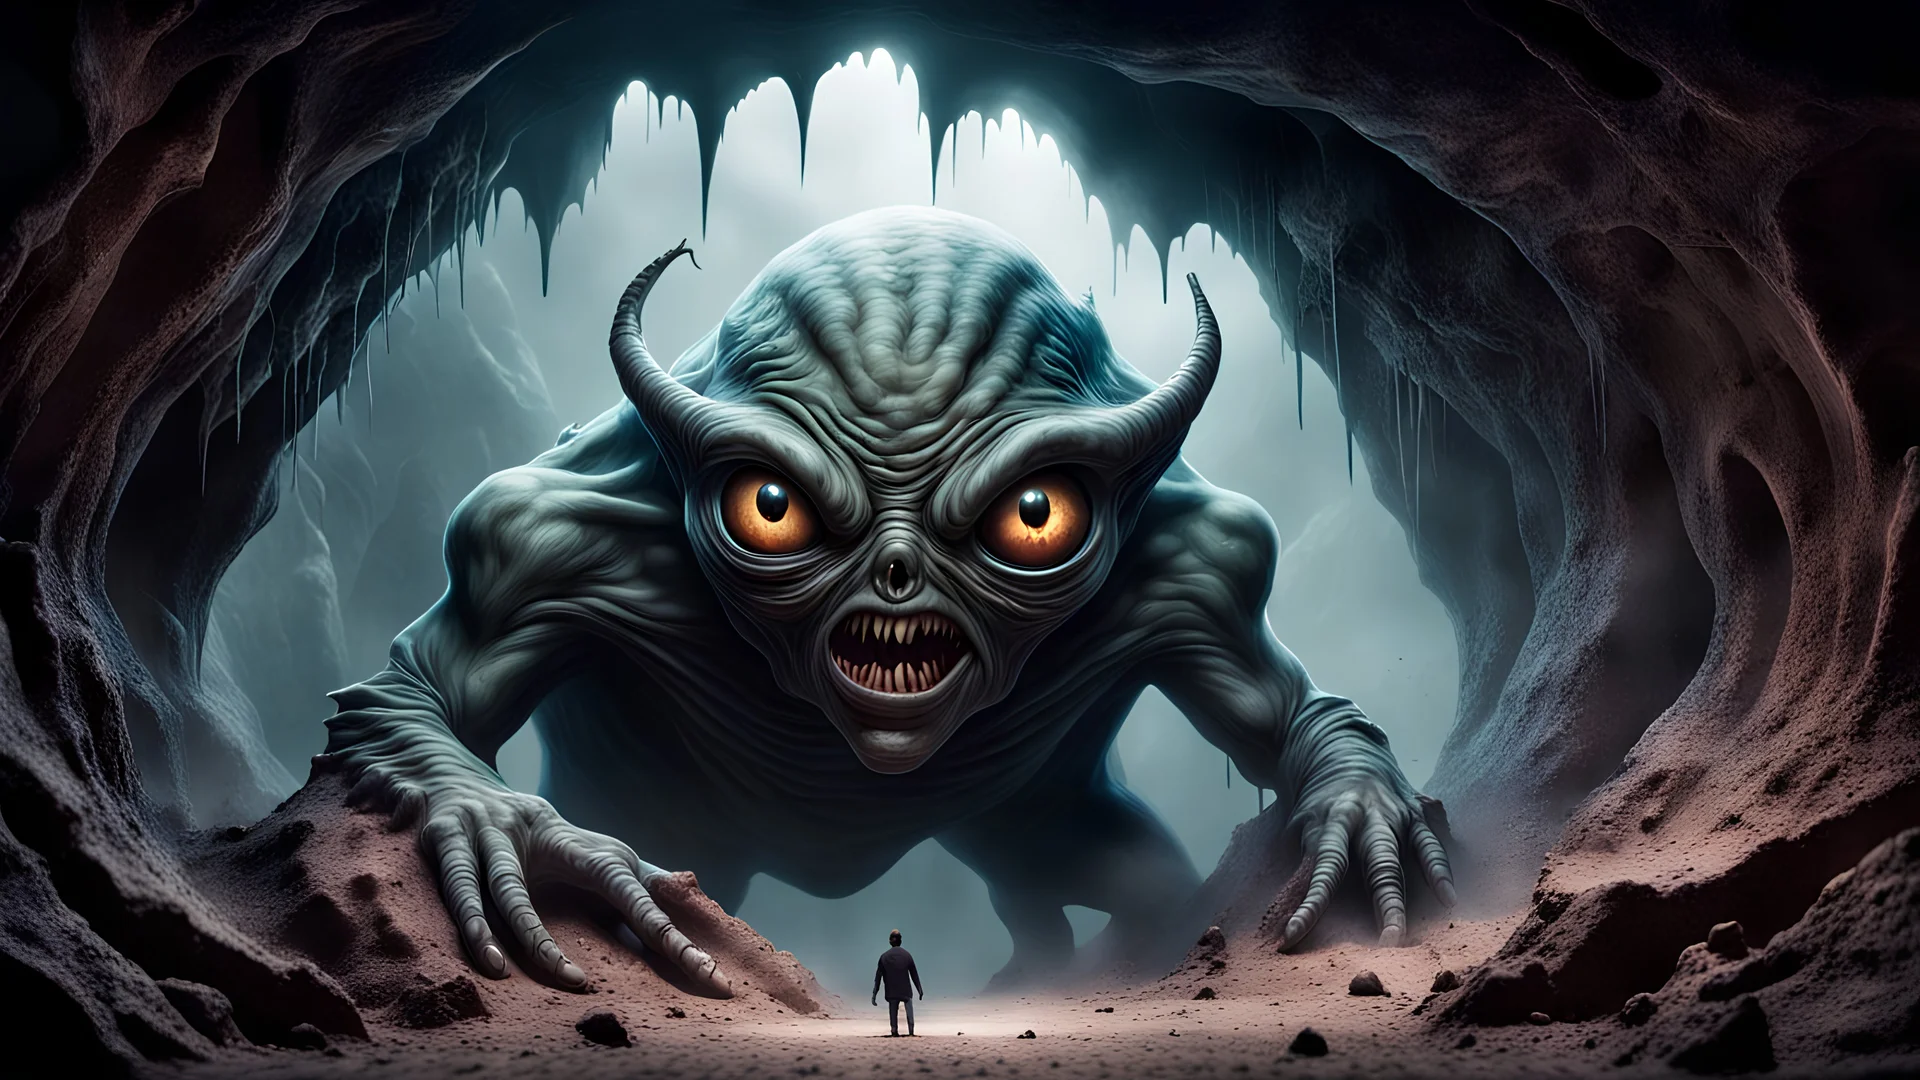 A realistic airbrush illustration of an evil alien environment with a scary, evil creature with extremely detailed and oversized bulging, eyes looking into a large cave, splatter, science fiction, fantasy, phenomena, supernatural, nikon80d, no grain